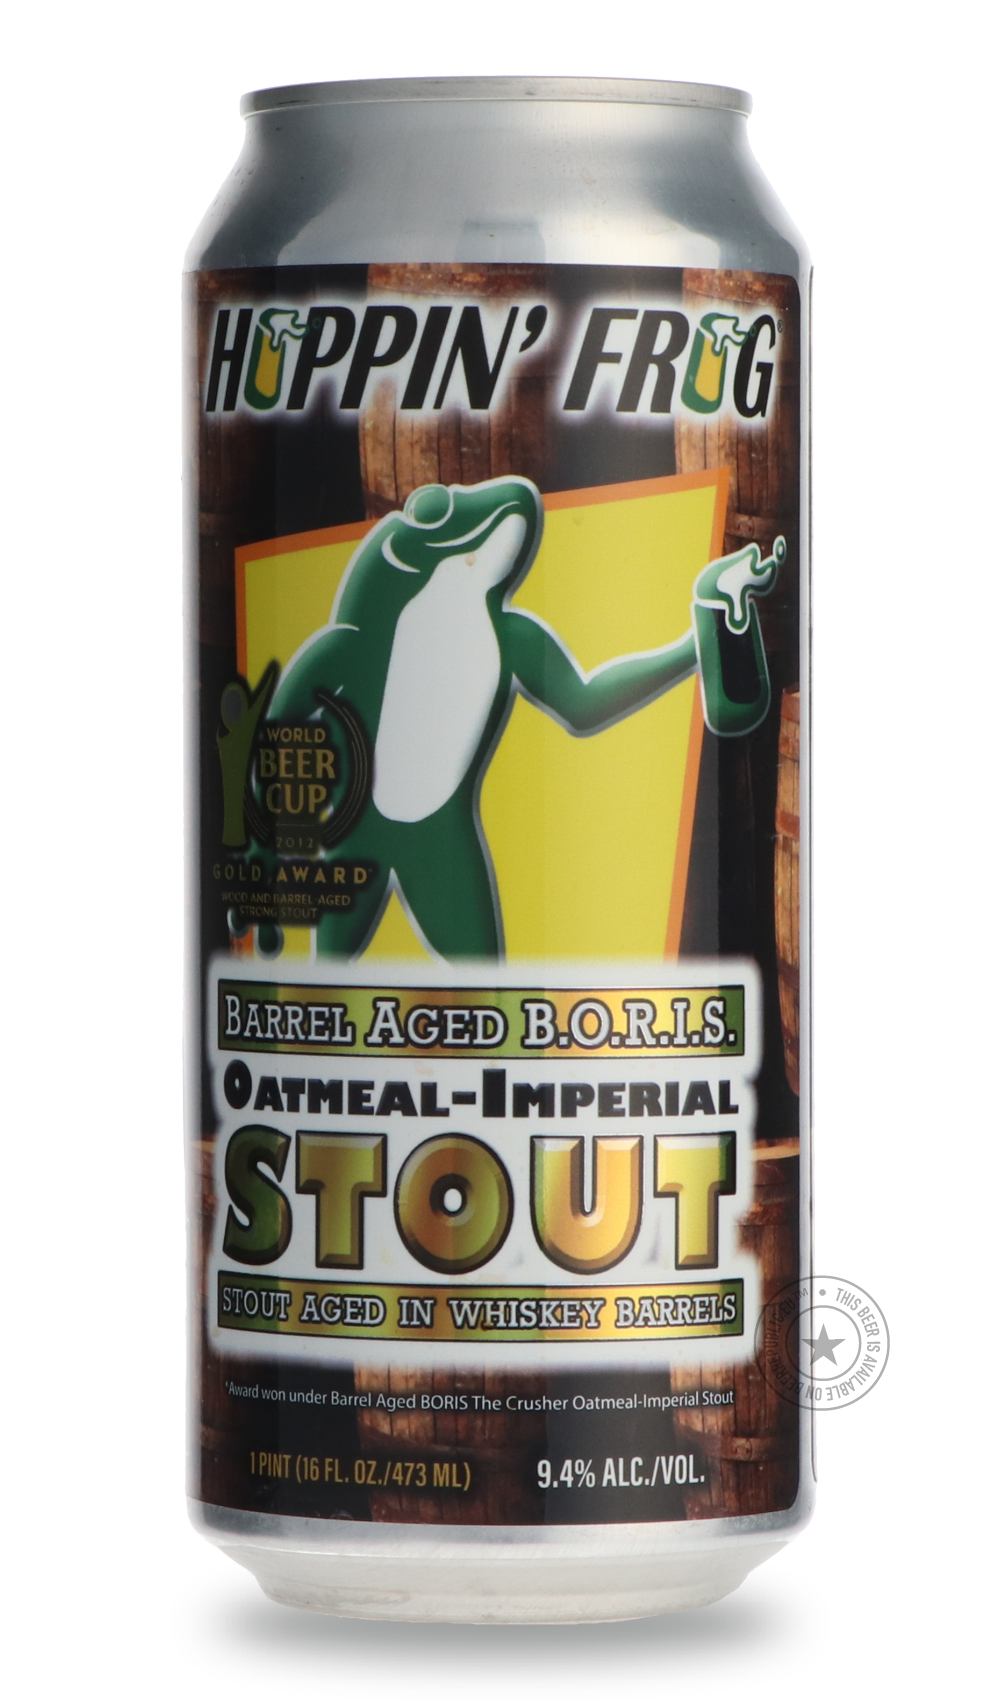 -Hoppin' Frog- Barrel Aged B.O.R.I.S.-Stout & Porter- Only @ Beer Republic - The best online beer store for American & Canadian craft beer - Buy beer online from the USA and Canada - Bier online kopen - Amerikaans bier kopen - Craft beer store - Craft beer kopen - Amerikanisch bier kaufen - Bier online kaufen - Acheter biere online - IPA - Stout - Porter - New England IPA - Hazy IPA - Imperial Stout - Barrel Aged - Barrel Aged Imperial Stout - Brown - Dark beer - Blond - Blonde - Pilsner - Lager - Wheat - W